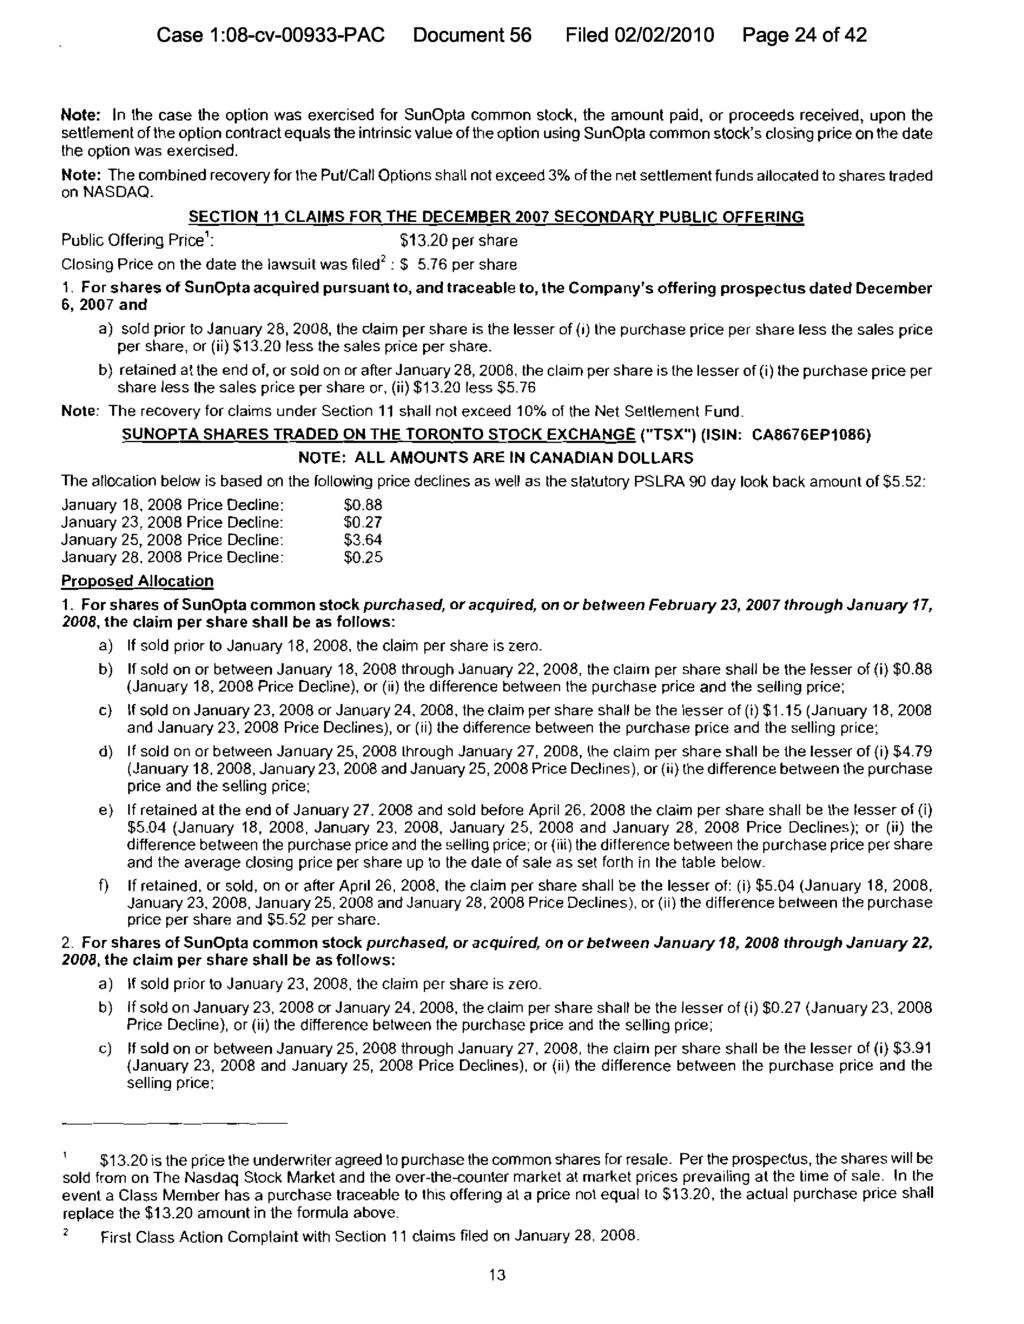 Case 1:08-cv-00933-PAC Document 56 Filed 02/02/2010 Page 24 of 42 Note: In the case the option was exercised for SunOpta common stock, the amount paid, or proceeds received, upon the settlement of